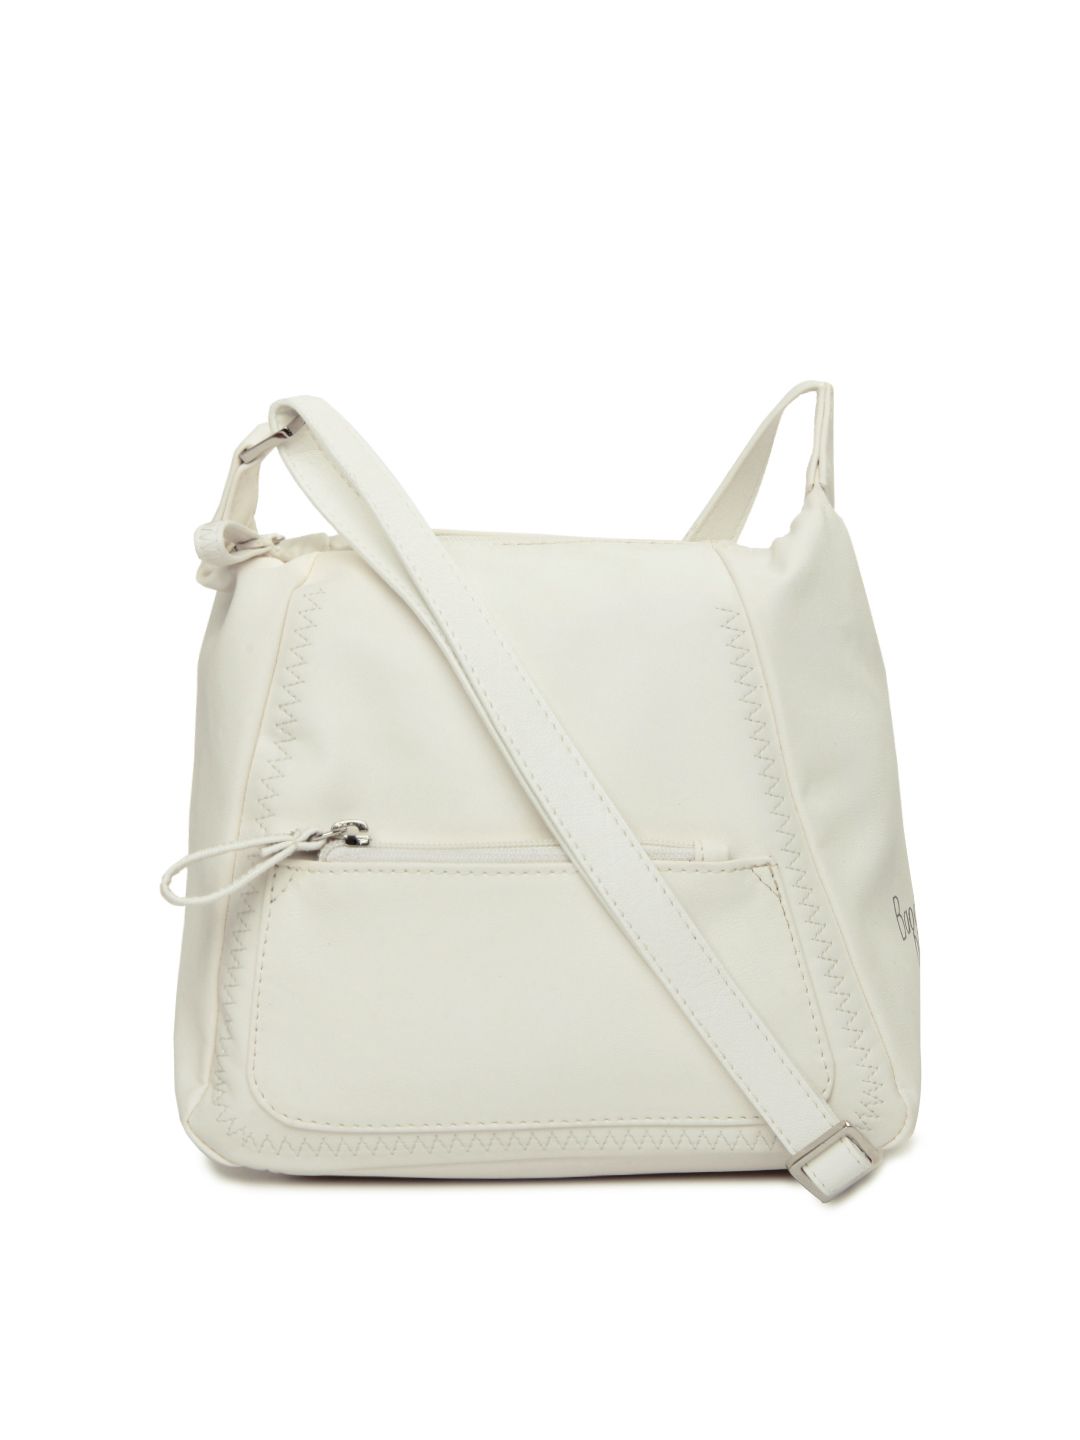 Buy Baggit White Sling Bag - 598 - Accessories for Women - 294638